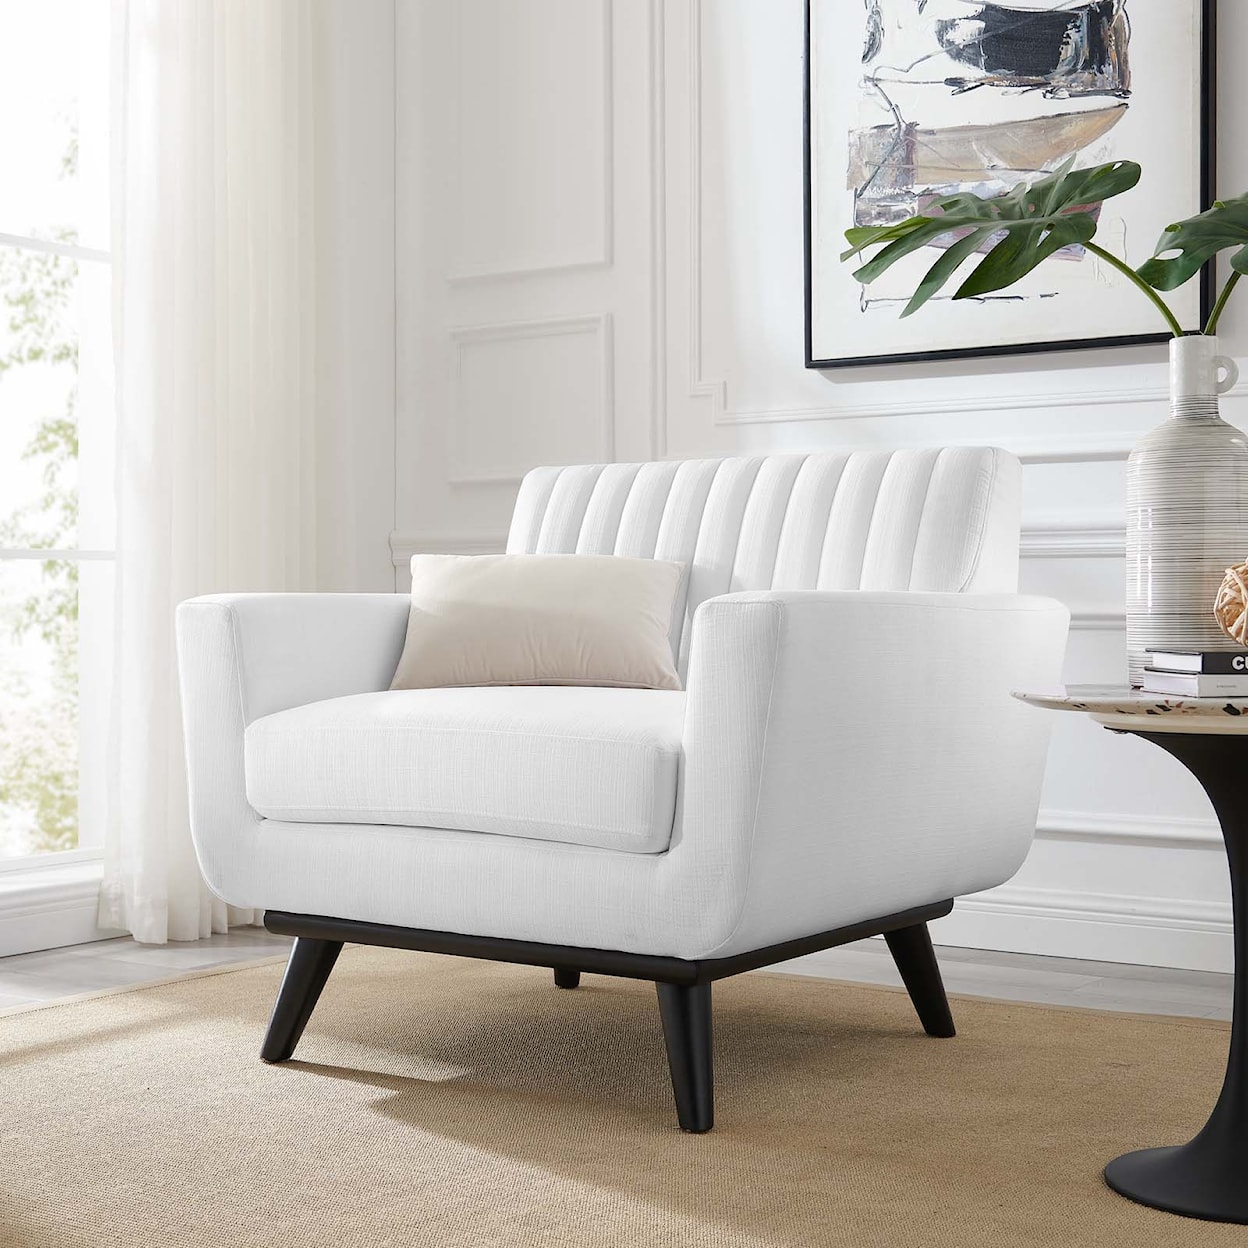 Modway Engage Armchair